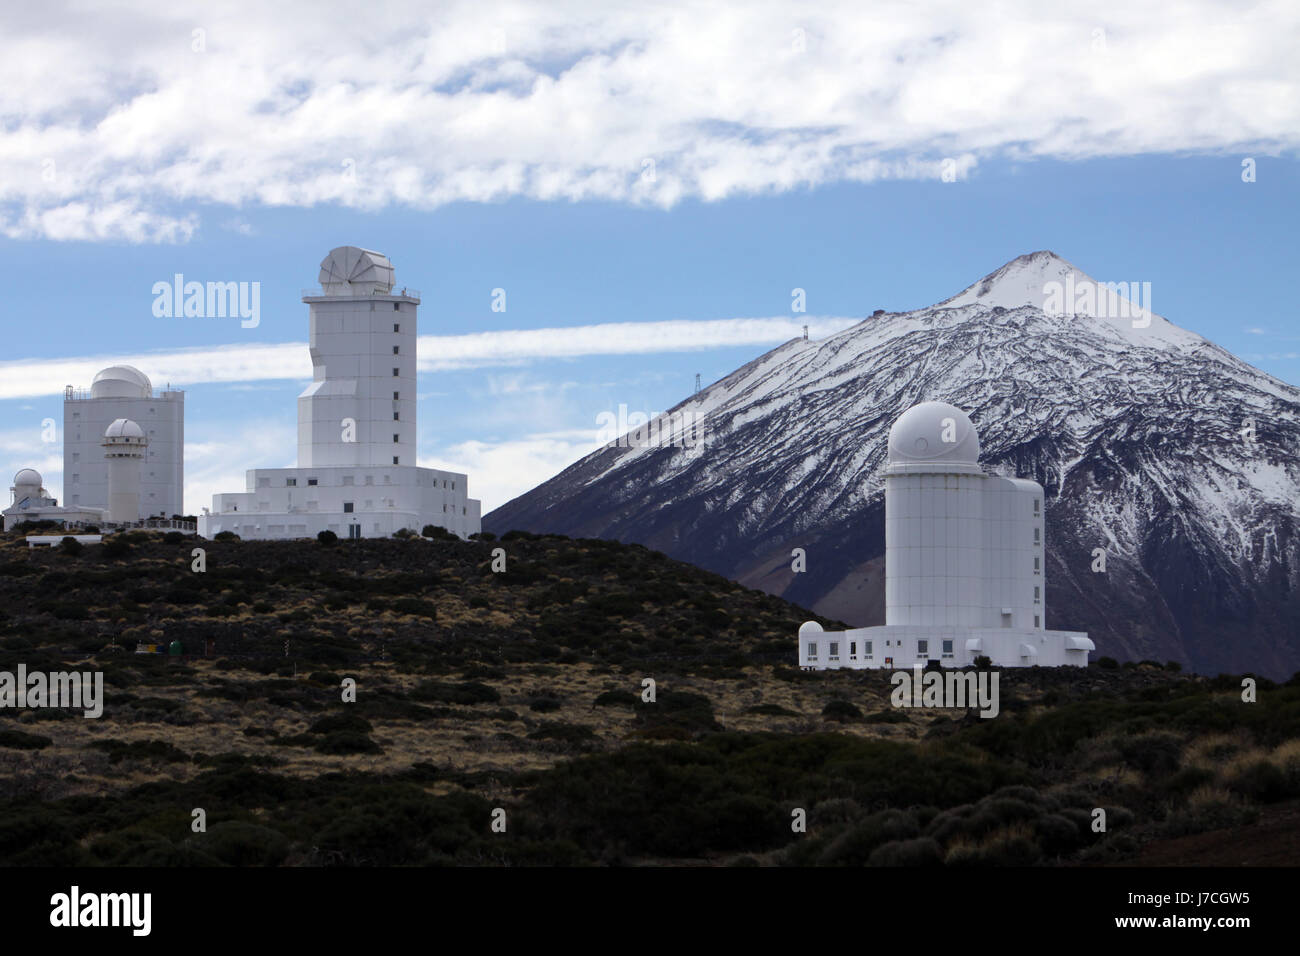 national park spain location shot canary islands style of construction Stock Photo